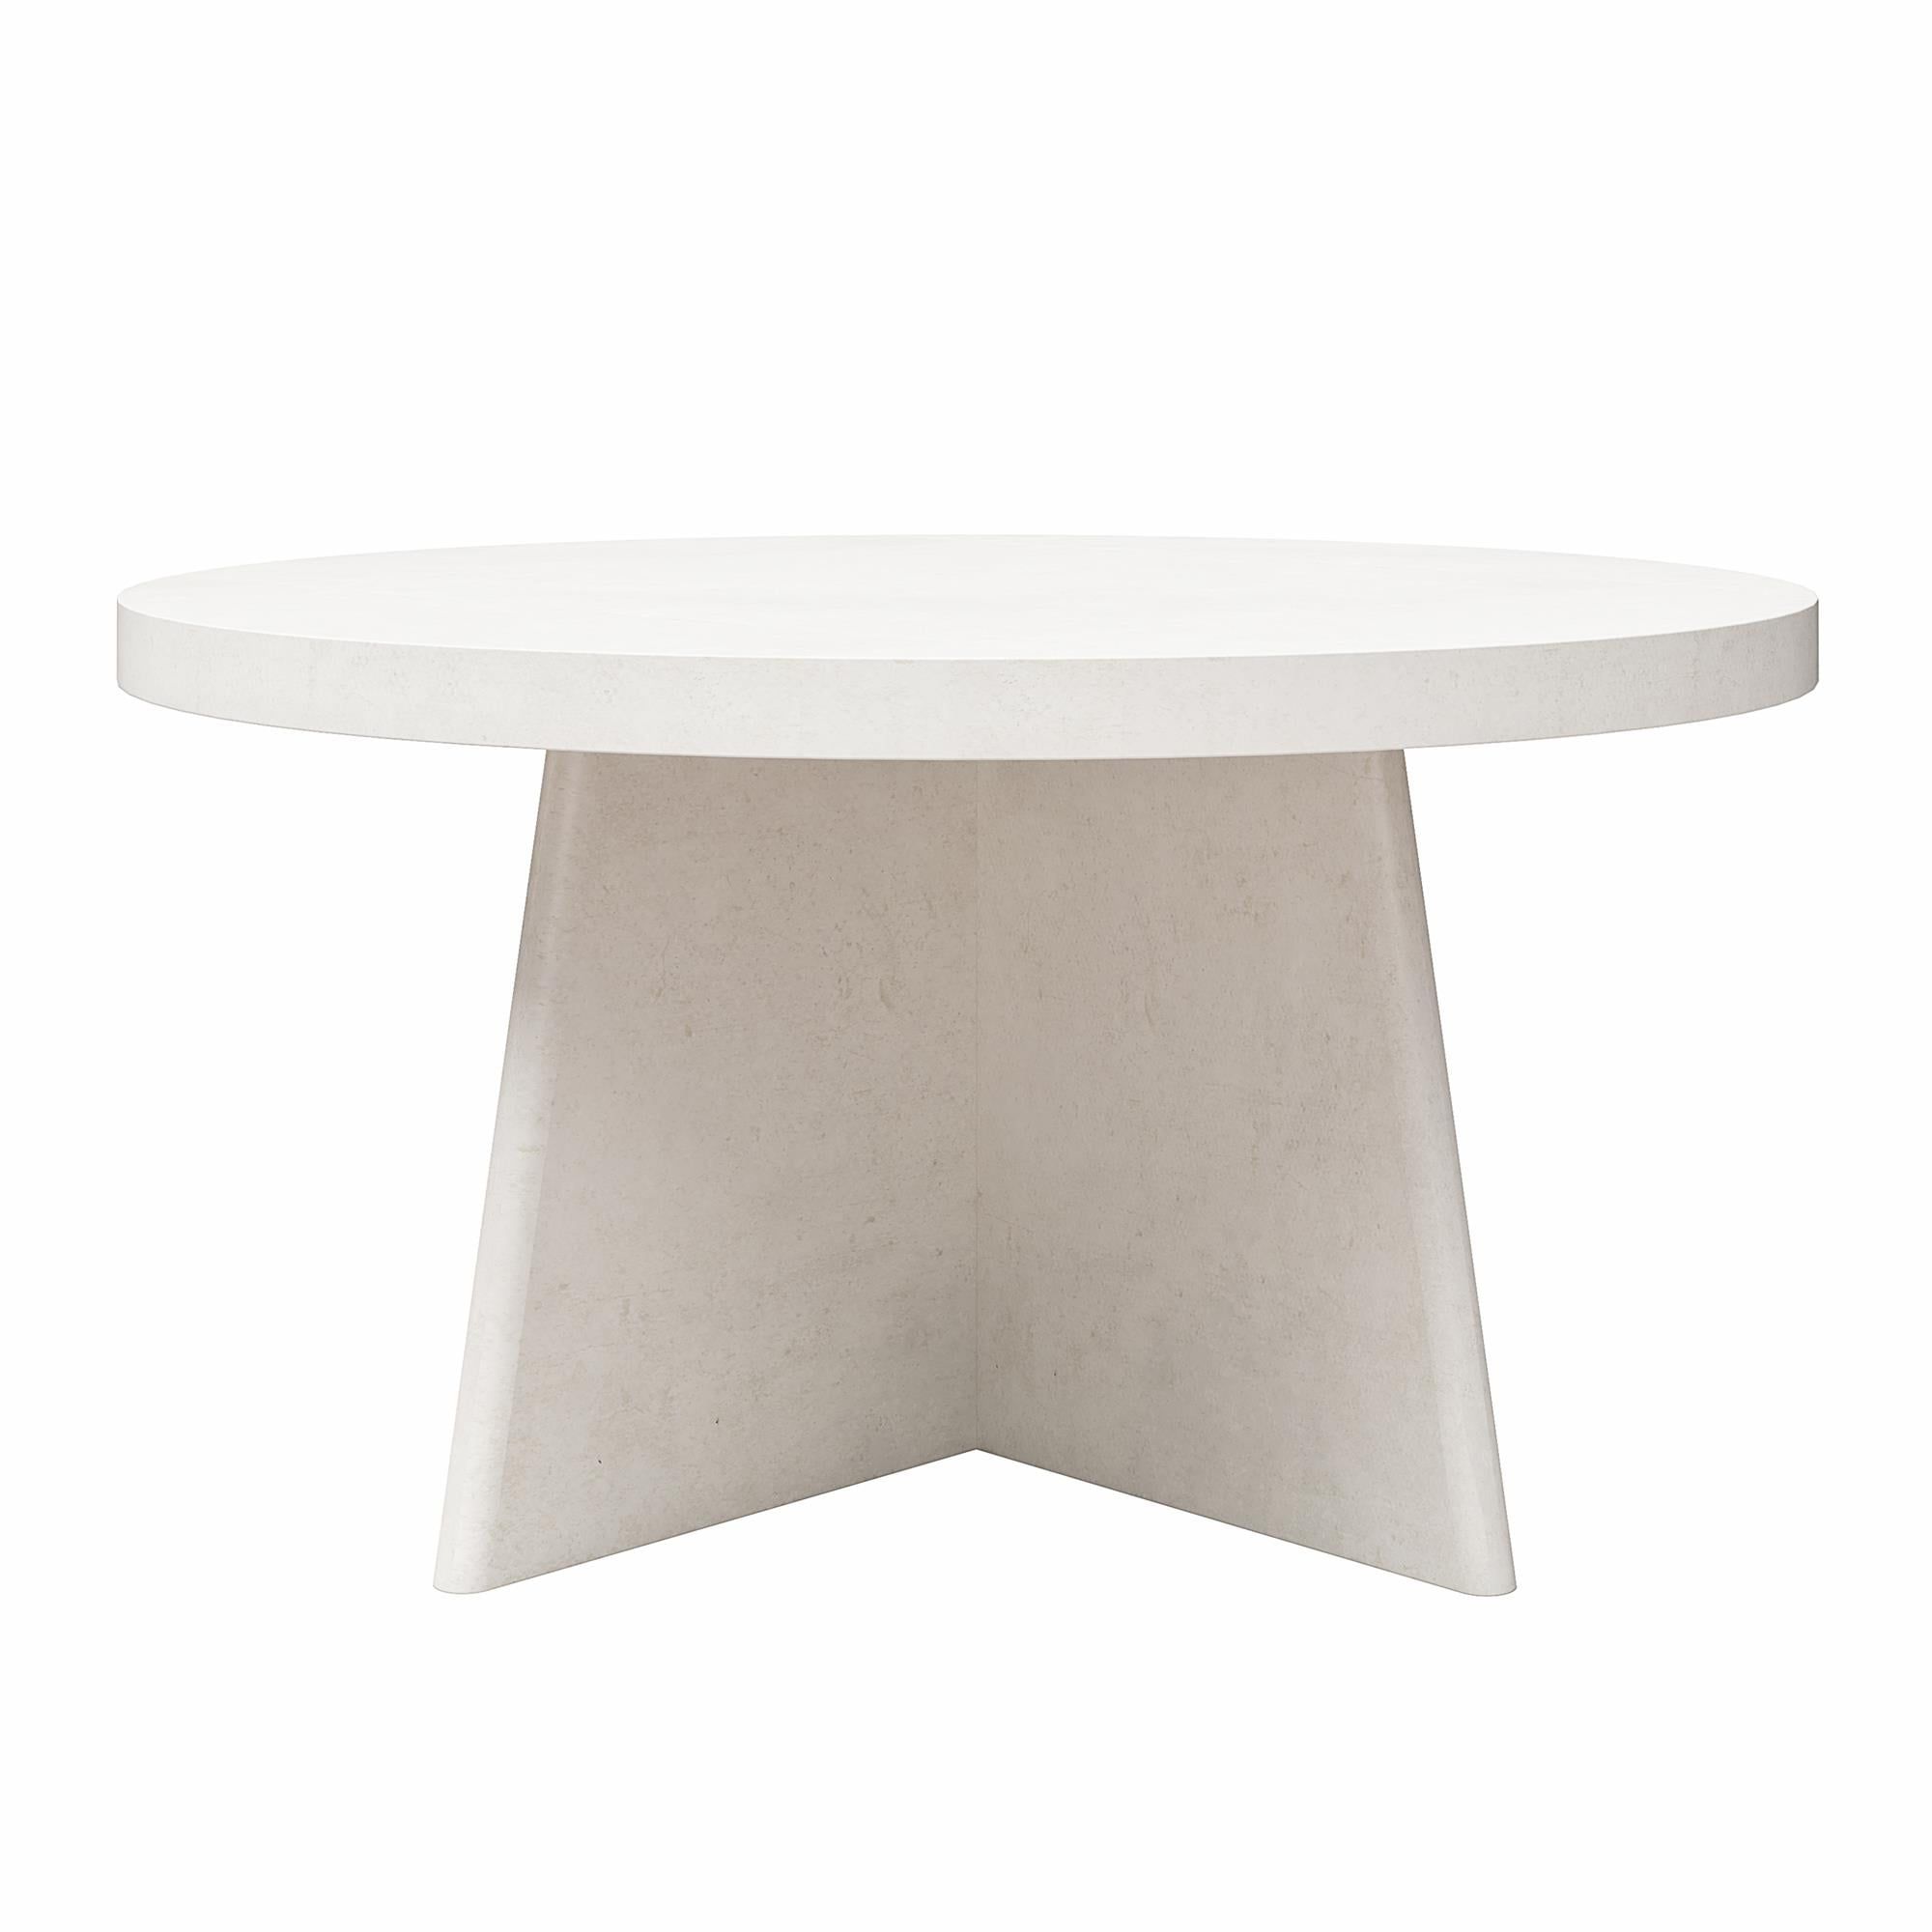 Queer Eye Liam Round Coffee Table, Plaster – Walmart Pertaining To Liam Round Plaster Coffee Tables (Gallery 10 of 20)